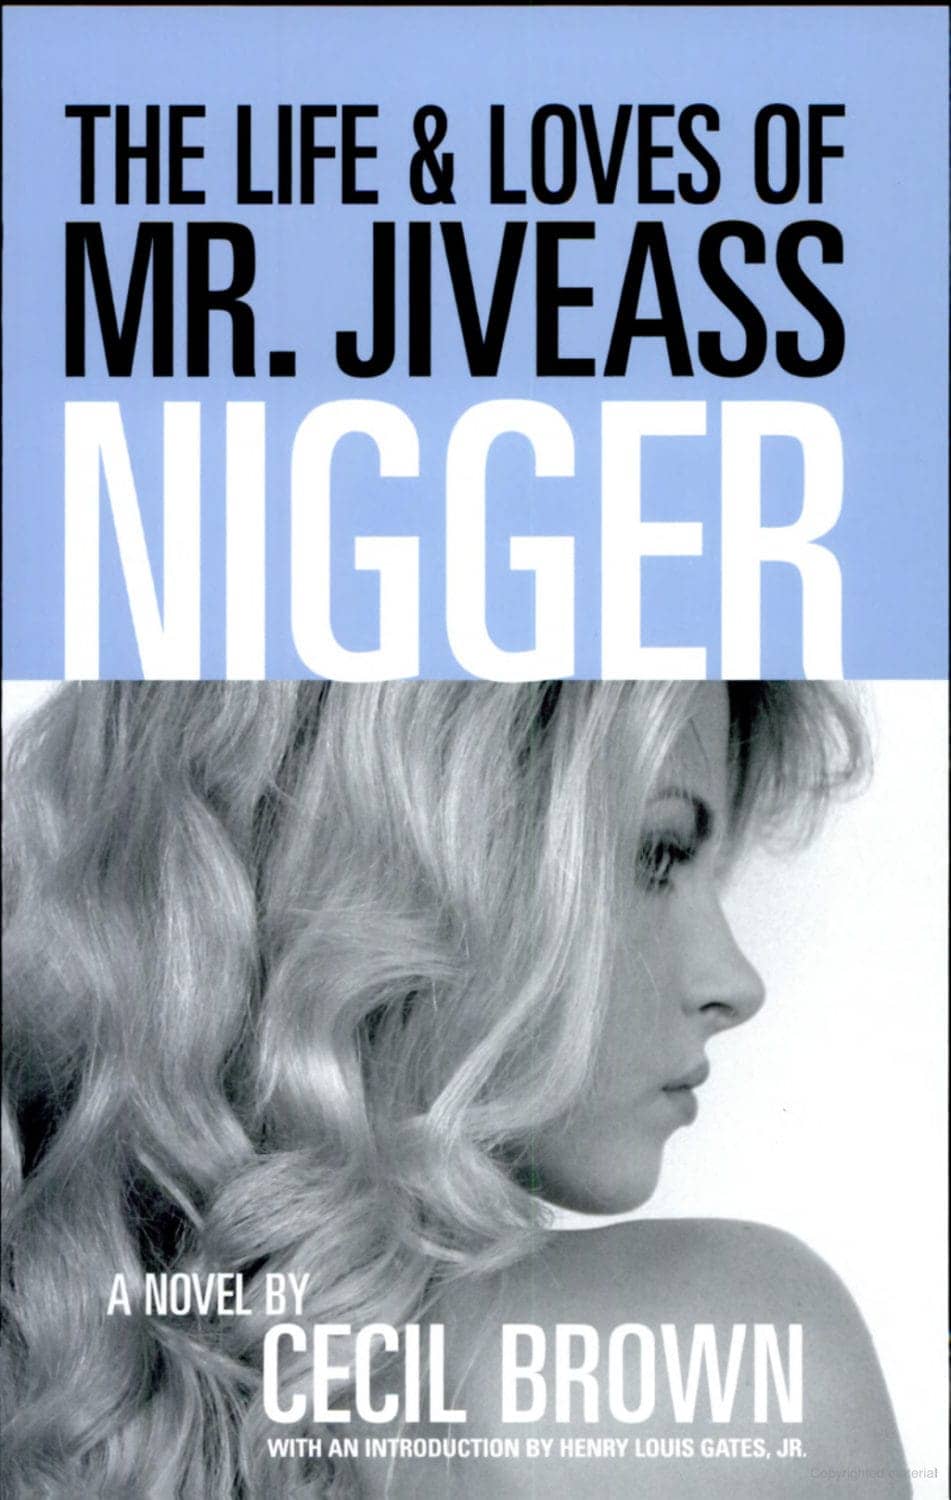 The-Life-and-Loves-of-Mr.-Jiveass-Nigger-by-Cecil-Brown-cover, Johnny Depp: Huckleberry Finn at 59 , Culture Currents 